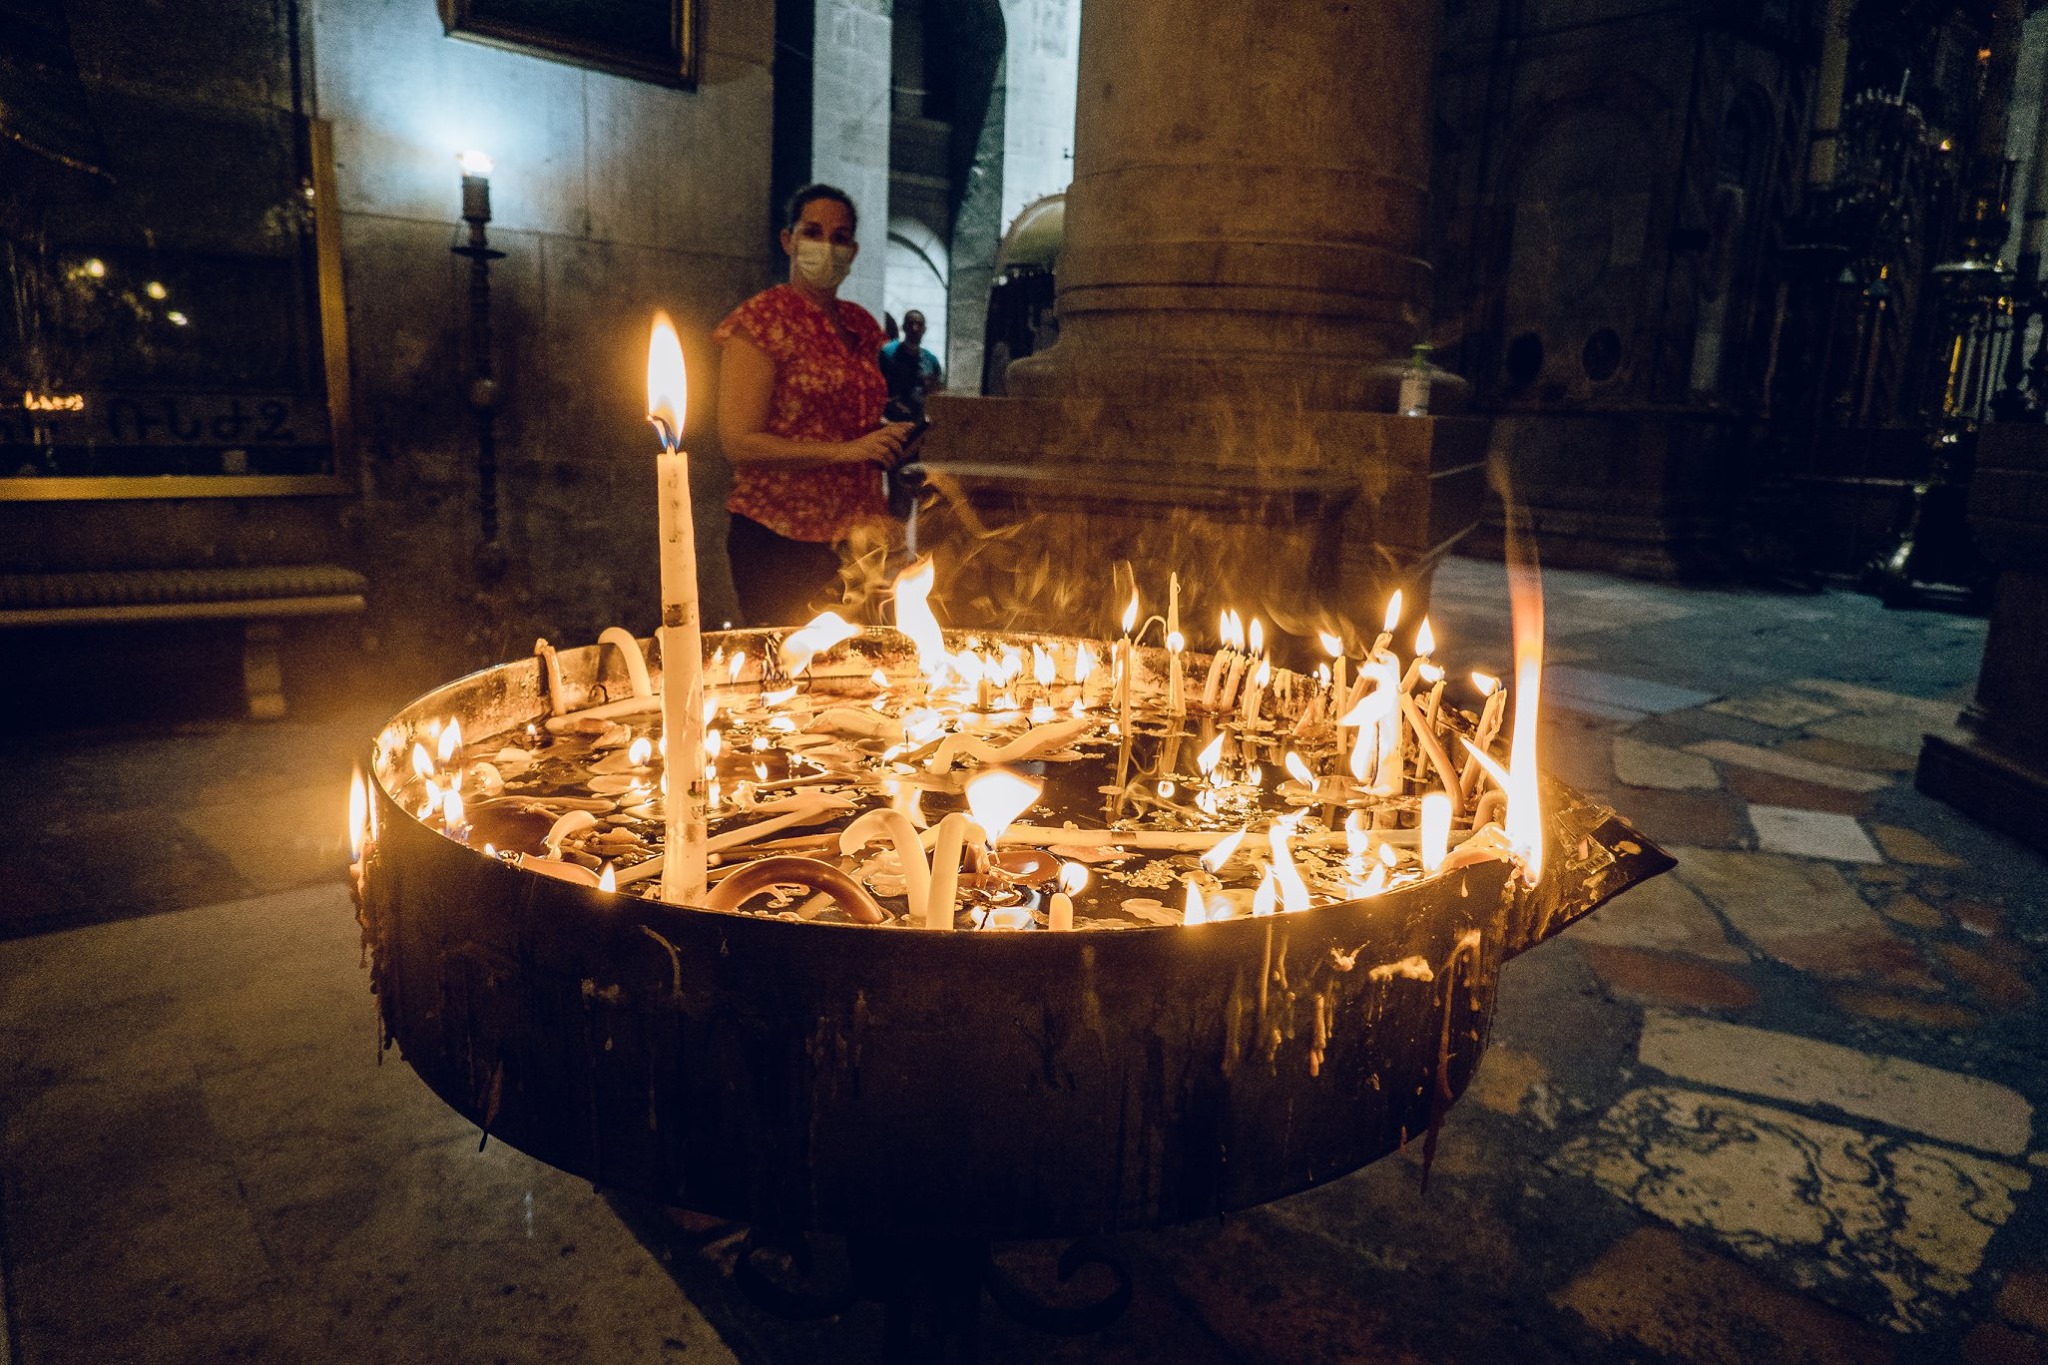 Lighting candles in the Church of the Holy Sepulchre